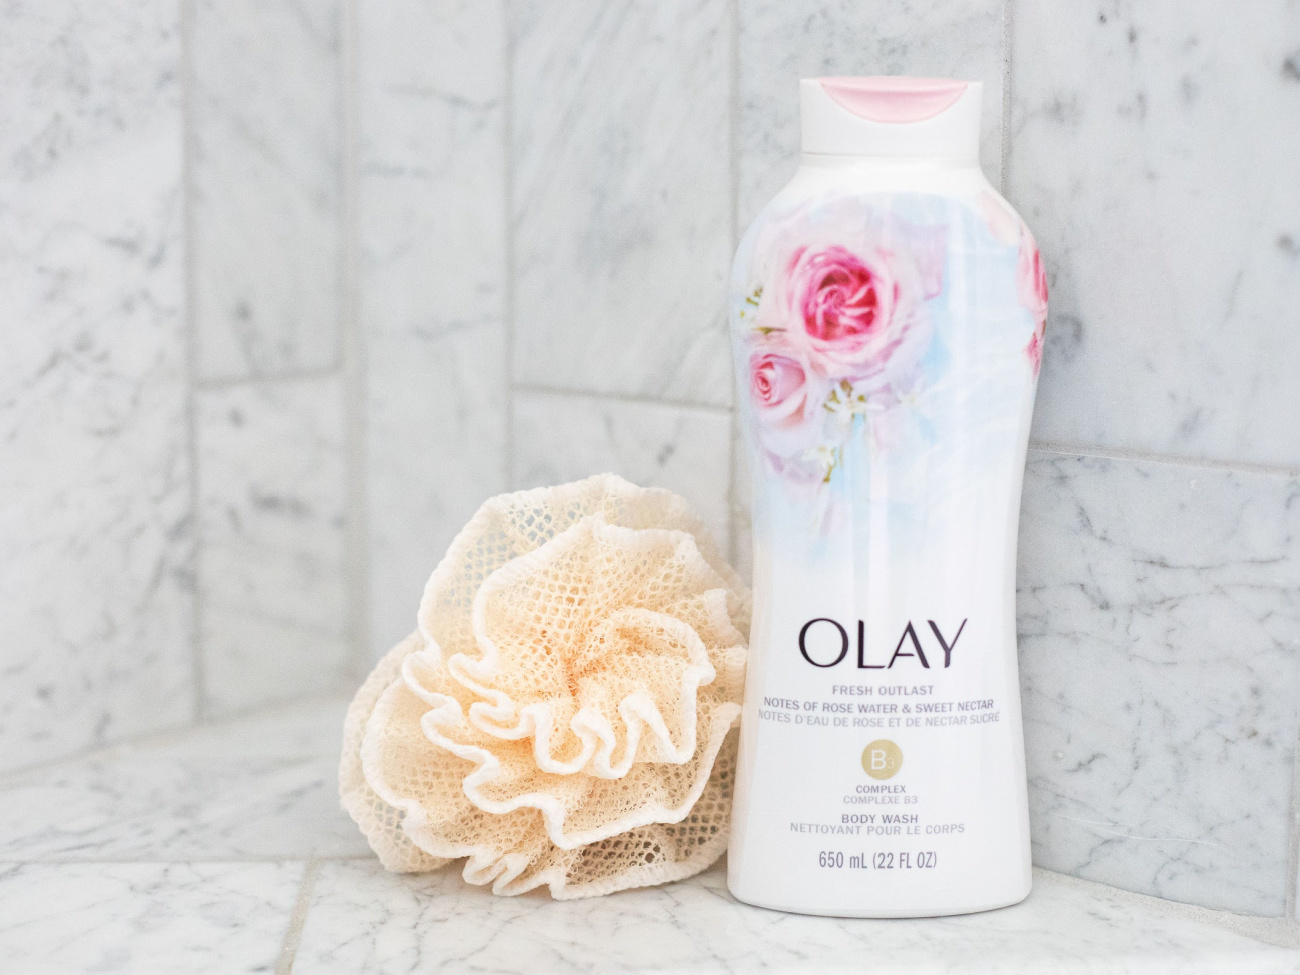 Get Deals On Olay Body Wash At Kroger – Bottles As Low As $3.32